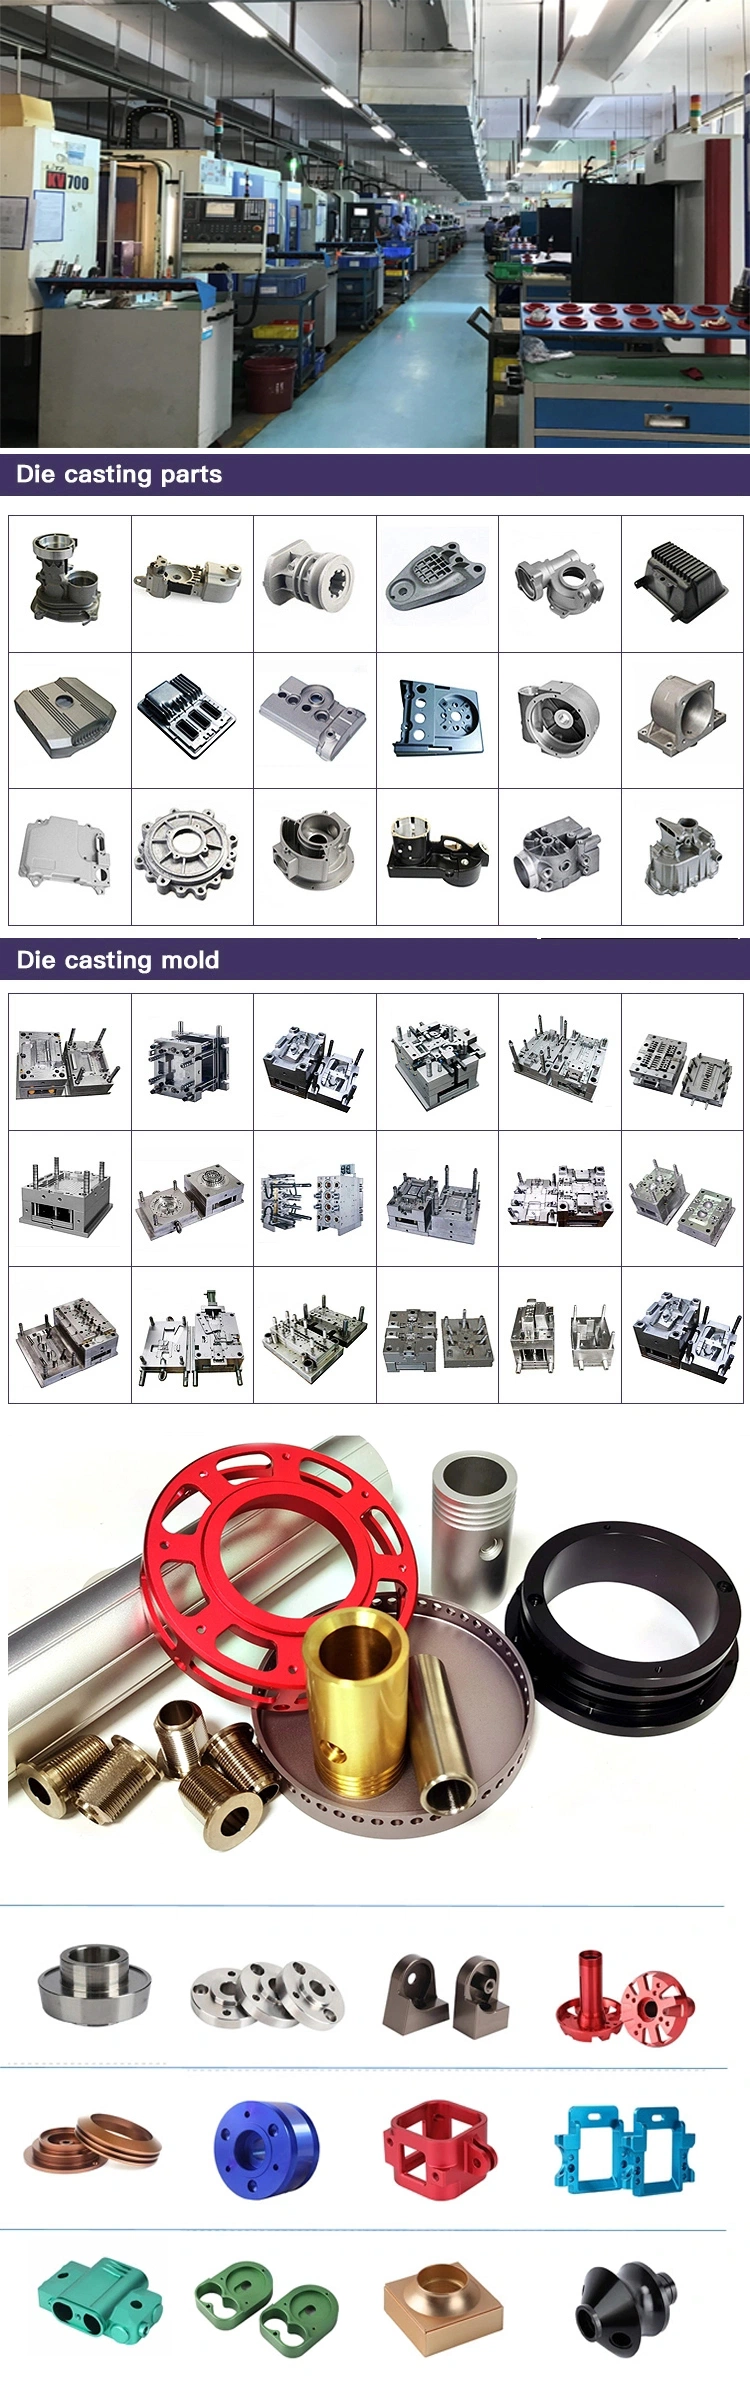 Factory Foundry Aluminum Alloy Machinery Parts Vehicle Part / Hardware Die Casting